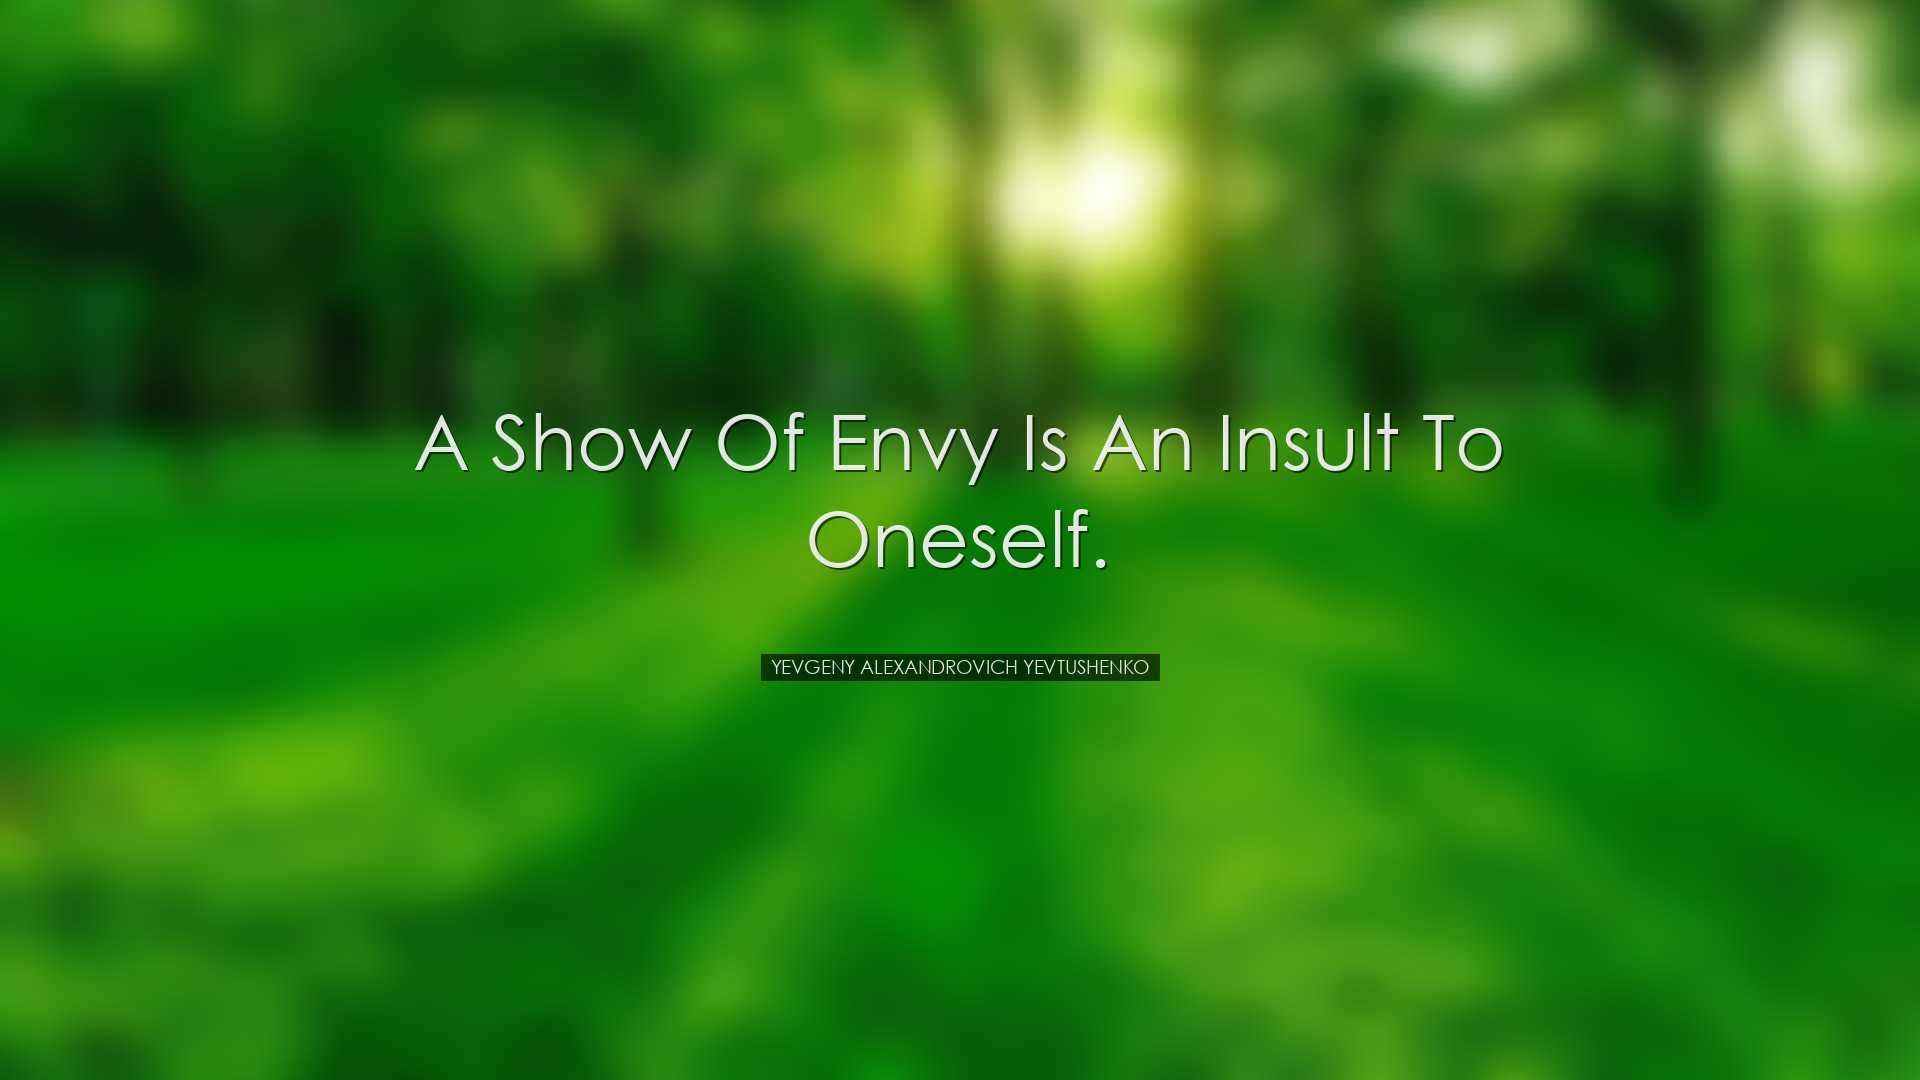 A show of envy is an insult to oneself. - Yevgeny Alexandrovich Ye